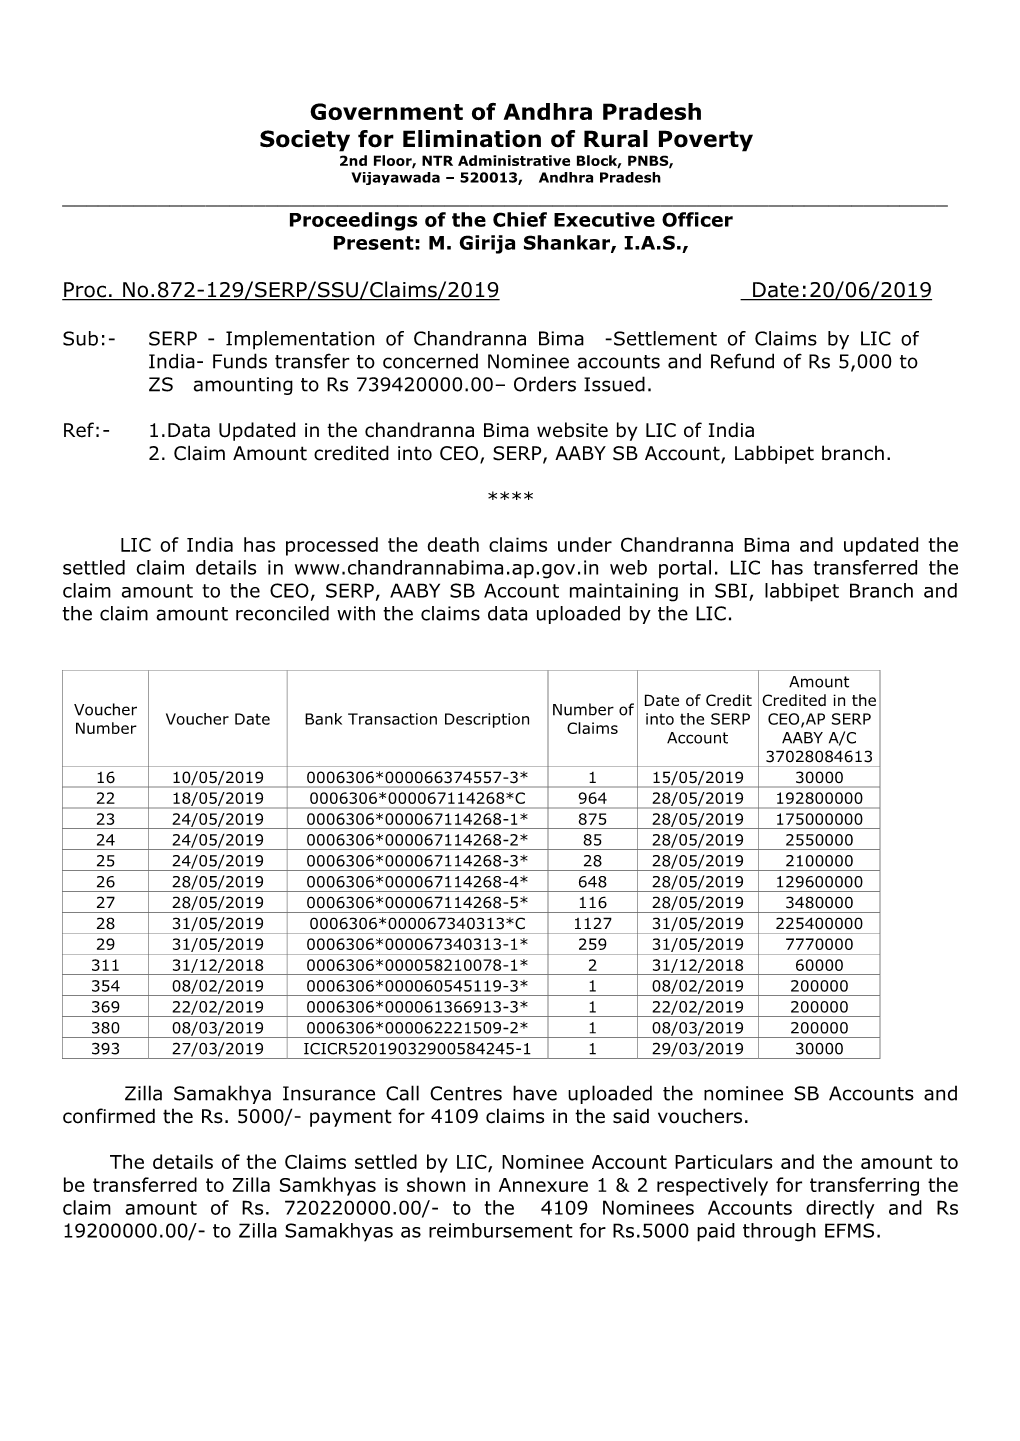 Government of Andhra Pradesh Society for Elimination of Rural